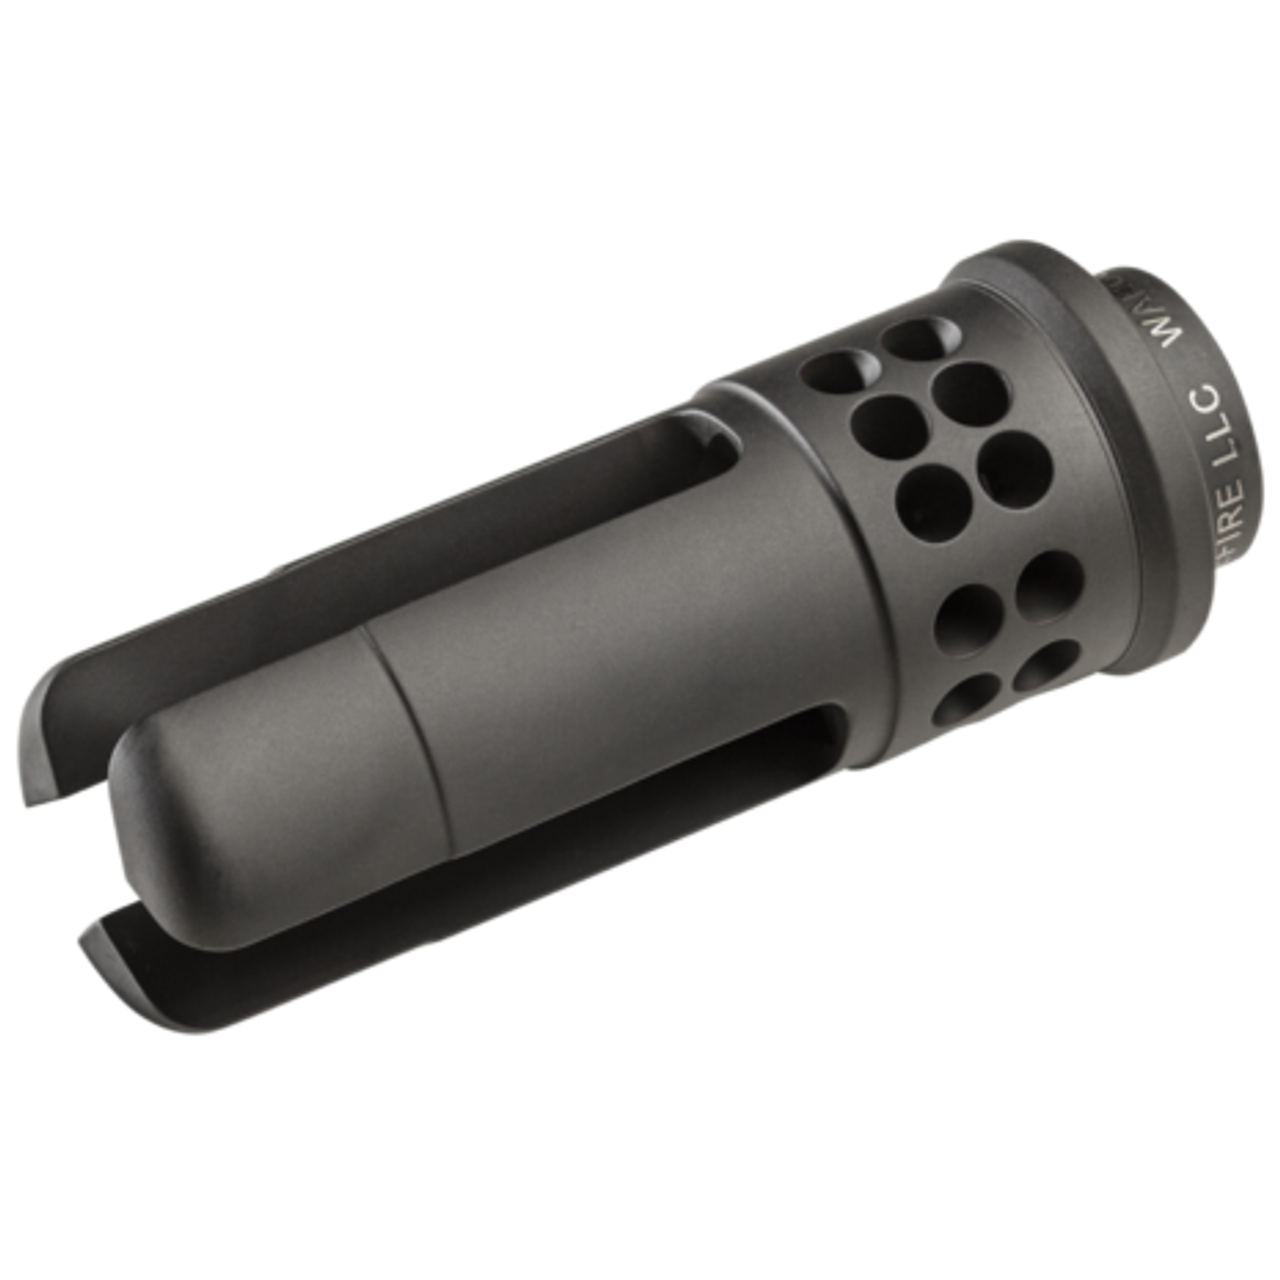 The revolutionary SureFire WARCOMP-556-M15X1 flash hider, which fits HK 417 weapons and variants with M15X1 TPI muzzle threads, is the world’s most shootable flash hider. Its patent-pending design provides three valuable functions:

It provides over 99% reduction in muzzle flash compared to a plain muzzle, which helps to conceal the shooter’s location and preserve his dark-adapted vision.
It virtually eliminates muzzle rise, which enhances monitoring of target reaction and staying on target for faster follow-up shots.
It serves as a rock-solid mounting adapter for all SureFire SOCOM Series 5.56mm Fast-Attach® suppressors, including our SOCOM556-RC model, which placed first in the most extensive and rigorous suppressor testing ever conducted by US Special Operations Command.
Precision machined from US Mill-certified heat-treated stainless steel bar stock — including high-precision single-point cut threads for optimum thread interface — the WARCOMP-556-M15X1 features an Ionbond DLC coating to provide maximum protection under harsh environmental conditions and to facilitate cleaning even after extreme use.

When used in conjunction with a SureFire SOCOM Series Fast-Attach suppressor, the WARCOMP provides multiple bearing surfaces to ensure superior suppressor alignment and prevent any ringing of tines inside the suppressor. A rear labyrinth seal mitigates gas leaking from the back of a suppressor, minimizes potential carbon buildup in the indexing system, and facilitates suppressor removal after extended firing. Every SureFire WarComp is individually inspected for concentricity and alignment.

For rock-solid mounting of a SOCOM Series suppressor, unparalleled flash reduction, and minimizing muzzle rise, there’s literally nothing like a SureFire WarComp—the world’s most shootable flash hider.

Features
Patent-pending design provides over 99% flash elimination; virtually eliminates muzzle rise
Serves as rock-solid mounting adapter for SureFire SOCOM suppressors
Multiple bearing surfaces provide suppressor alignment and prevent tines from ringing inside suppressor
Precision machined from US mill-certified heat-treated stainless steel bar stock
High-precision single-point cut barrel threads for optimum thread interface
Individually inspected for all critical dimensions, including concentricity and alignment
Ionbond DLC coating provides maximum protection against harsh environmental conditions and facilitates cleaning after extreme use
Labyrinth seals prevent carbon buildup on suppressor lock ring indexing system
Installation requires no permanent modifications to weapon
Made in the USA and backed by SureFire No-Hassle Guarantee